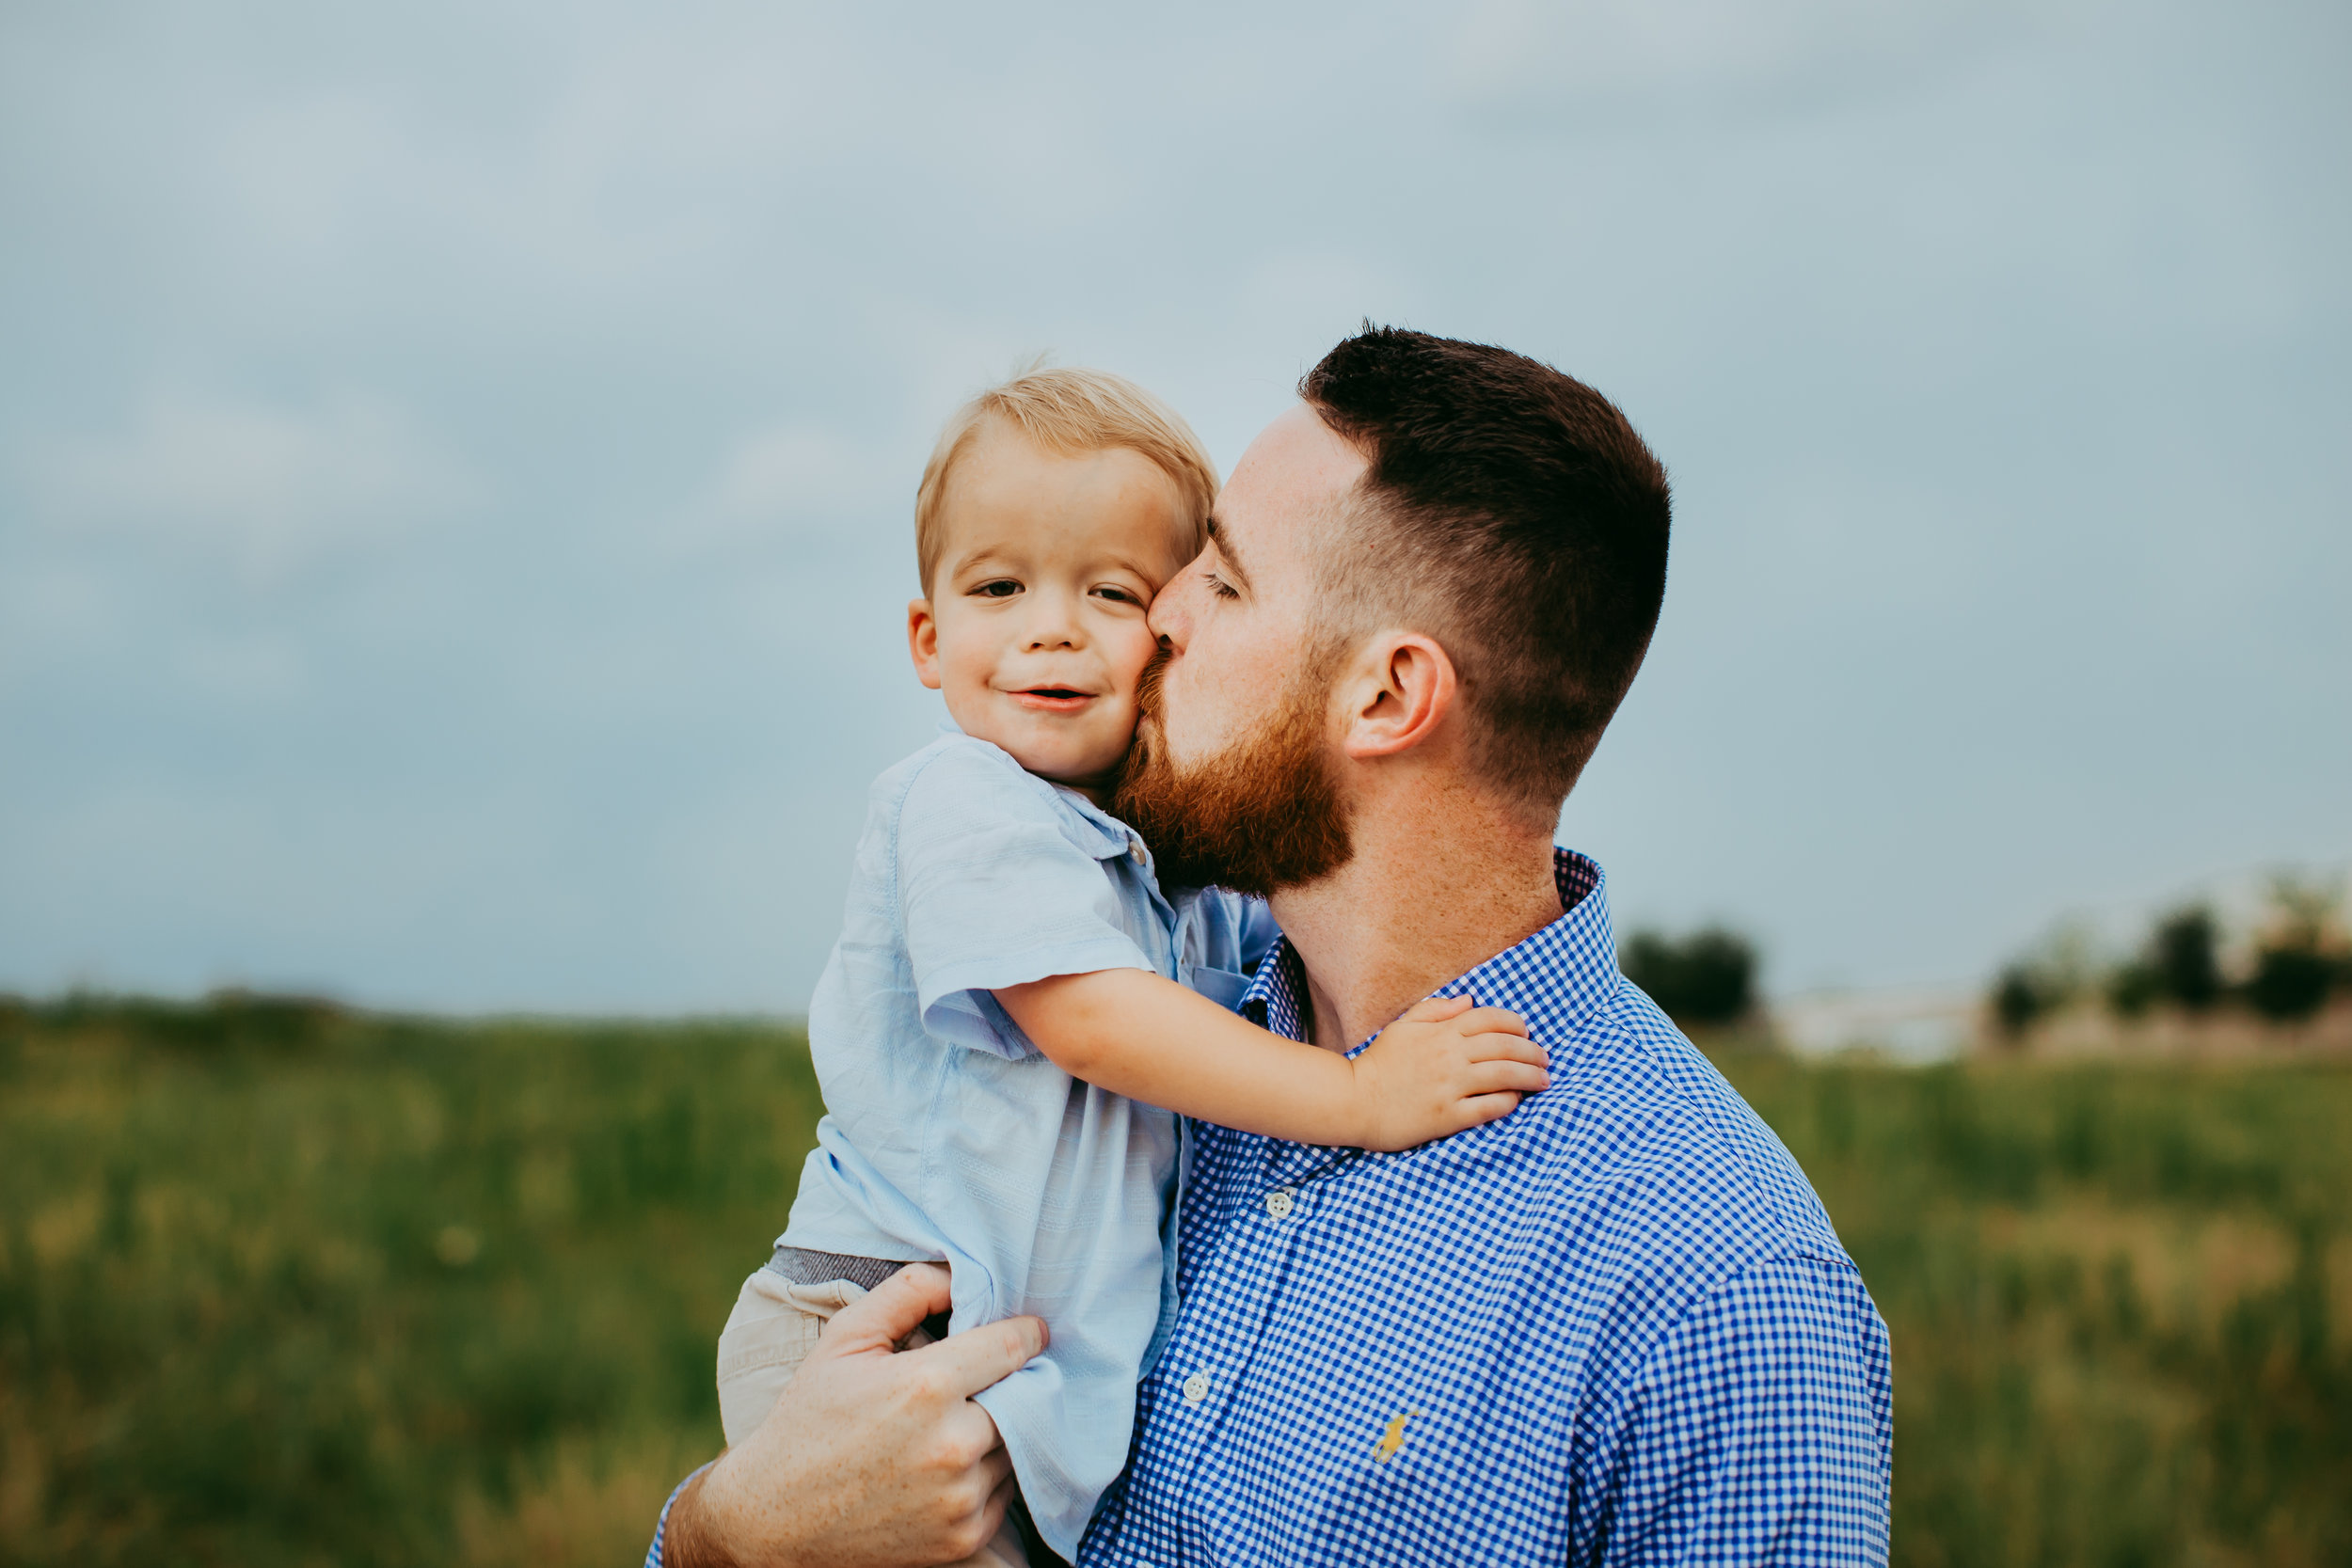  Dad kisses little one on the cheek both wearing different shades of blue #tealawardphotography #texasfamilyphotographer #amarillophotographer #amarillofamilyphotographer #lifestylephotography #emotionalphotography #familyphotosoot #family #lovingsiblings #purejoy #familyphotos #familyphotographer #greatoutdoors #naturalfamilyinteraction 